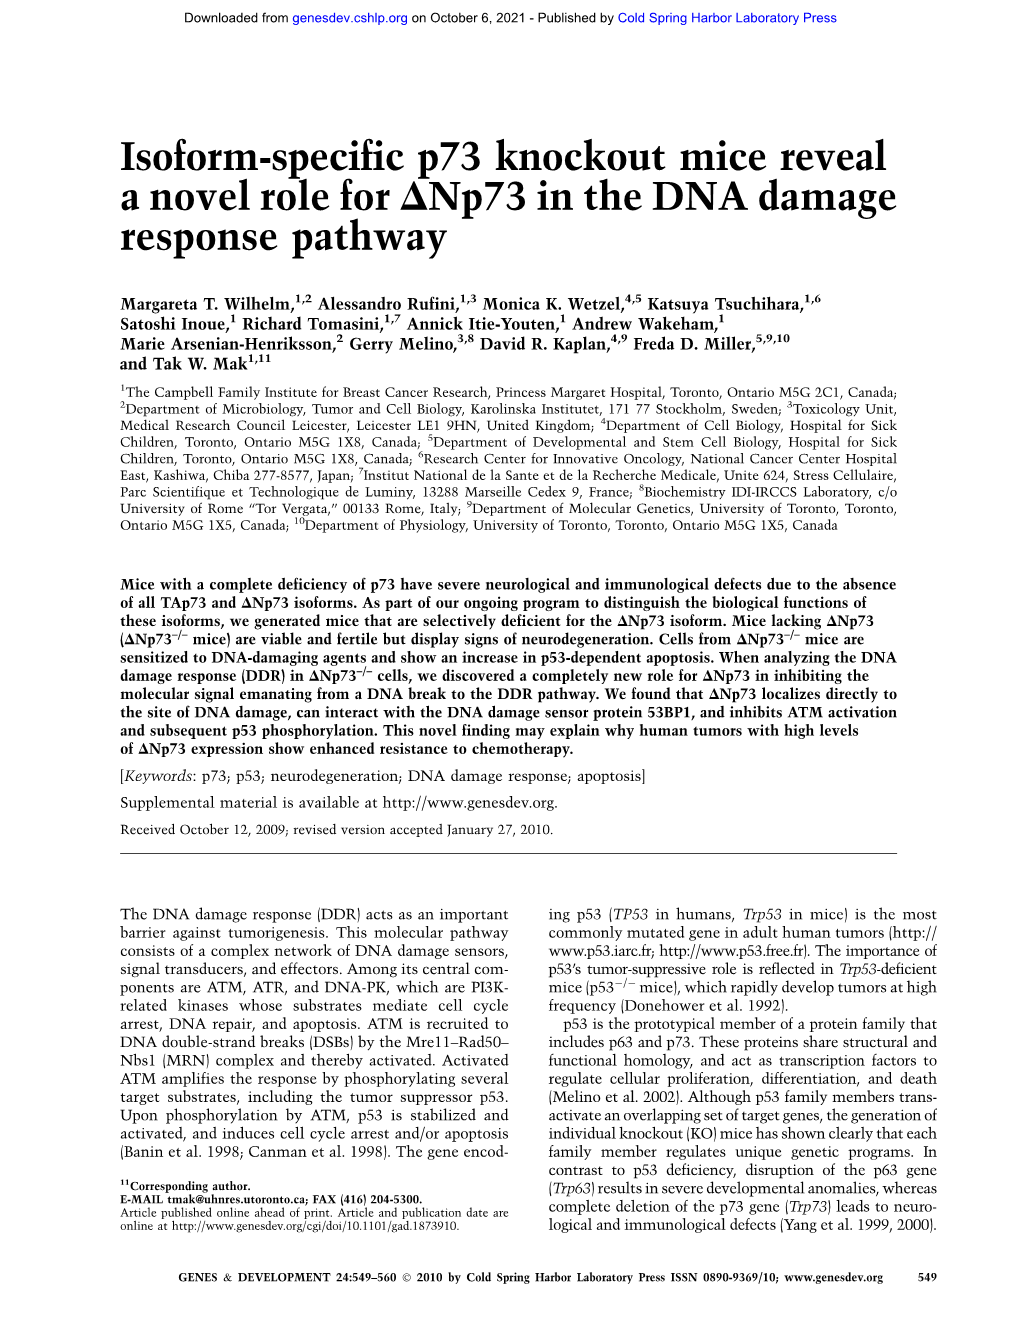 Isoform-Specific P73 Knockout Mice Reveal a Novel Role for Dnp73 in the DNA Damage Response Pathway